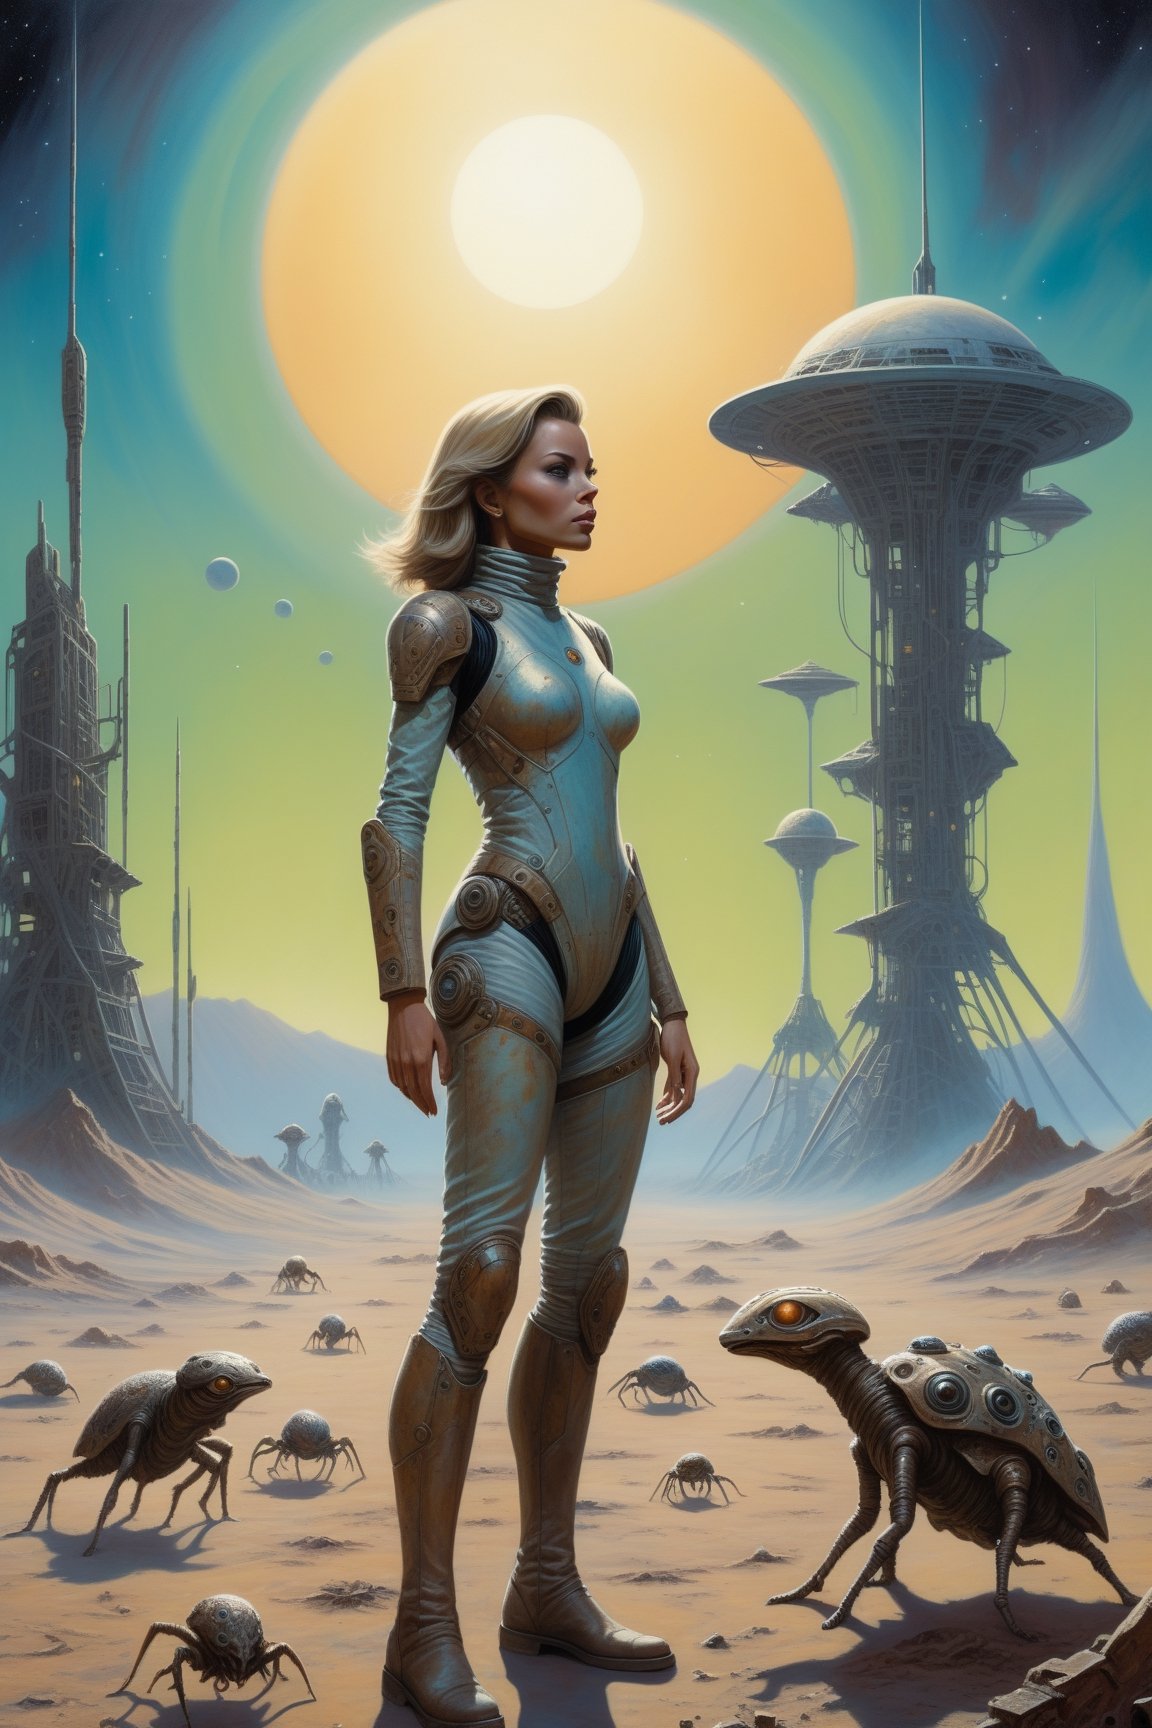 style of Kelly Freas, sci-fi poster, closeup, a woman standing alone on a barren planet, bathed in (ethereal light:0.4), with (tiny, strange creatures and abandoned tech structures:1.6) scattered around her, creating an atmosphere of (mystery and wonder:1.7).